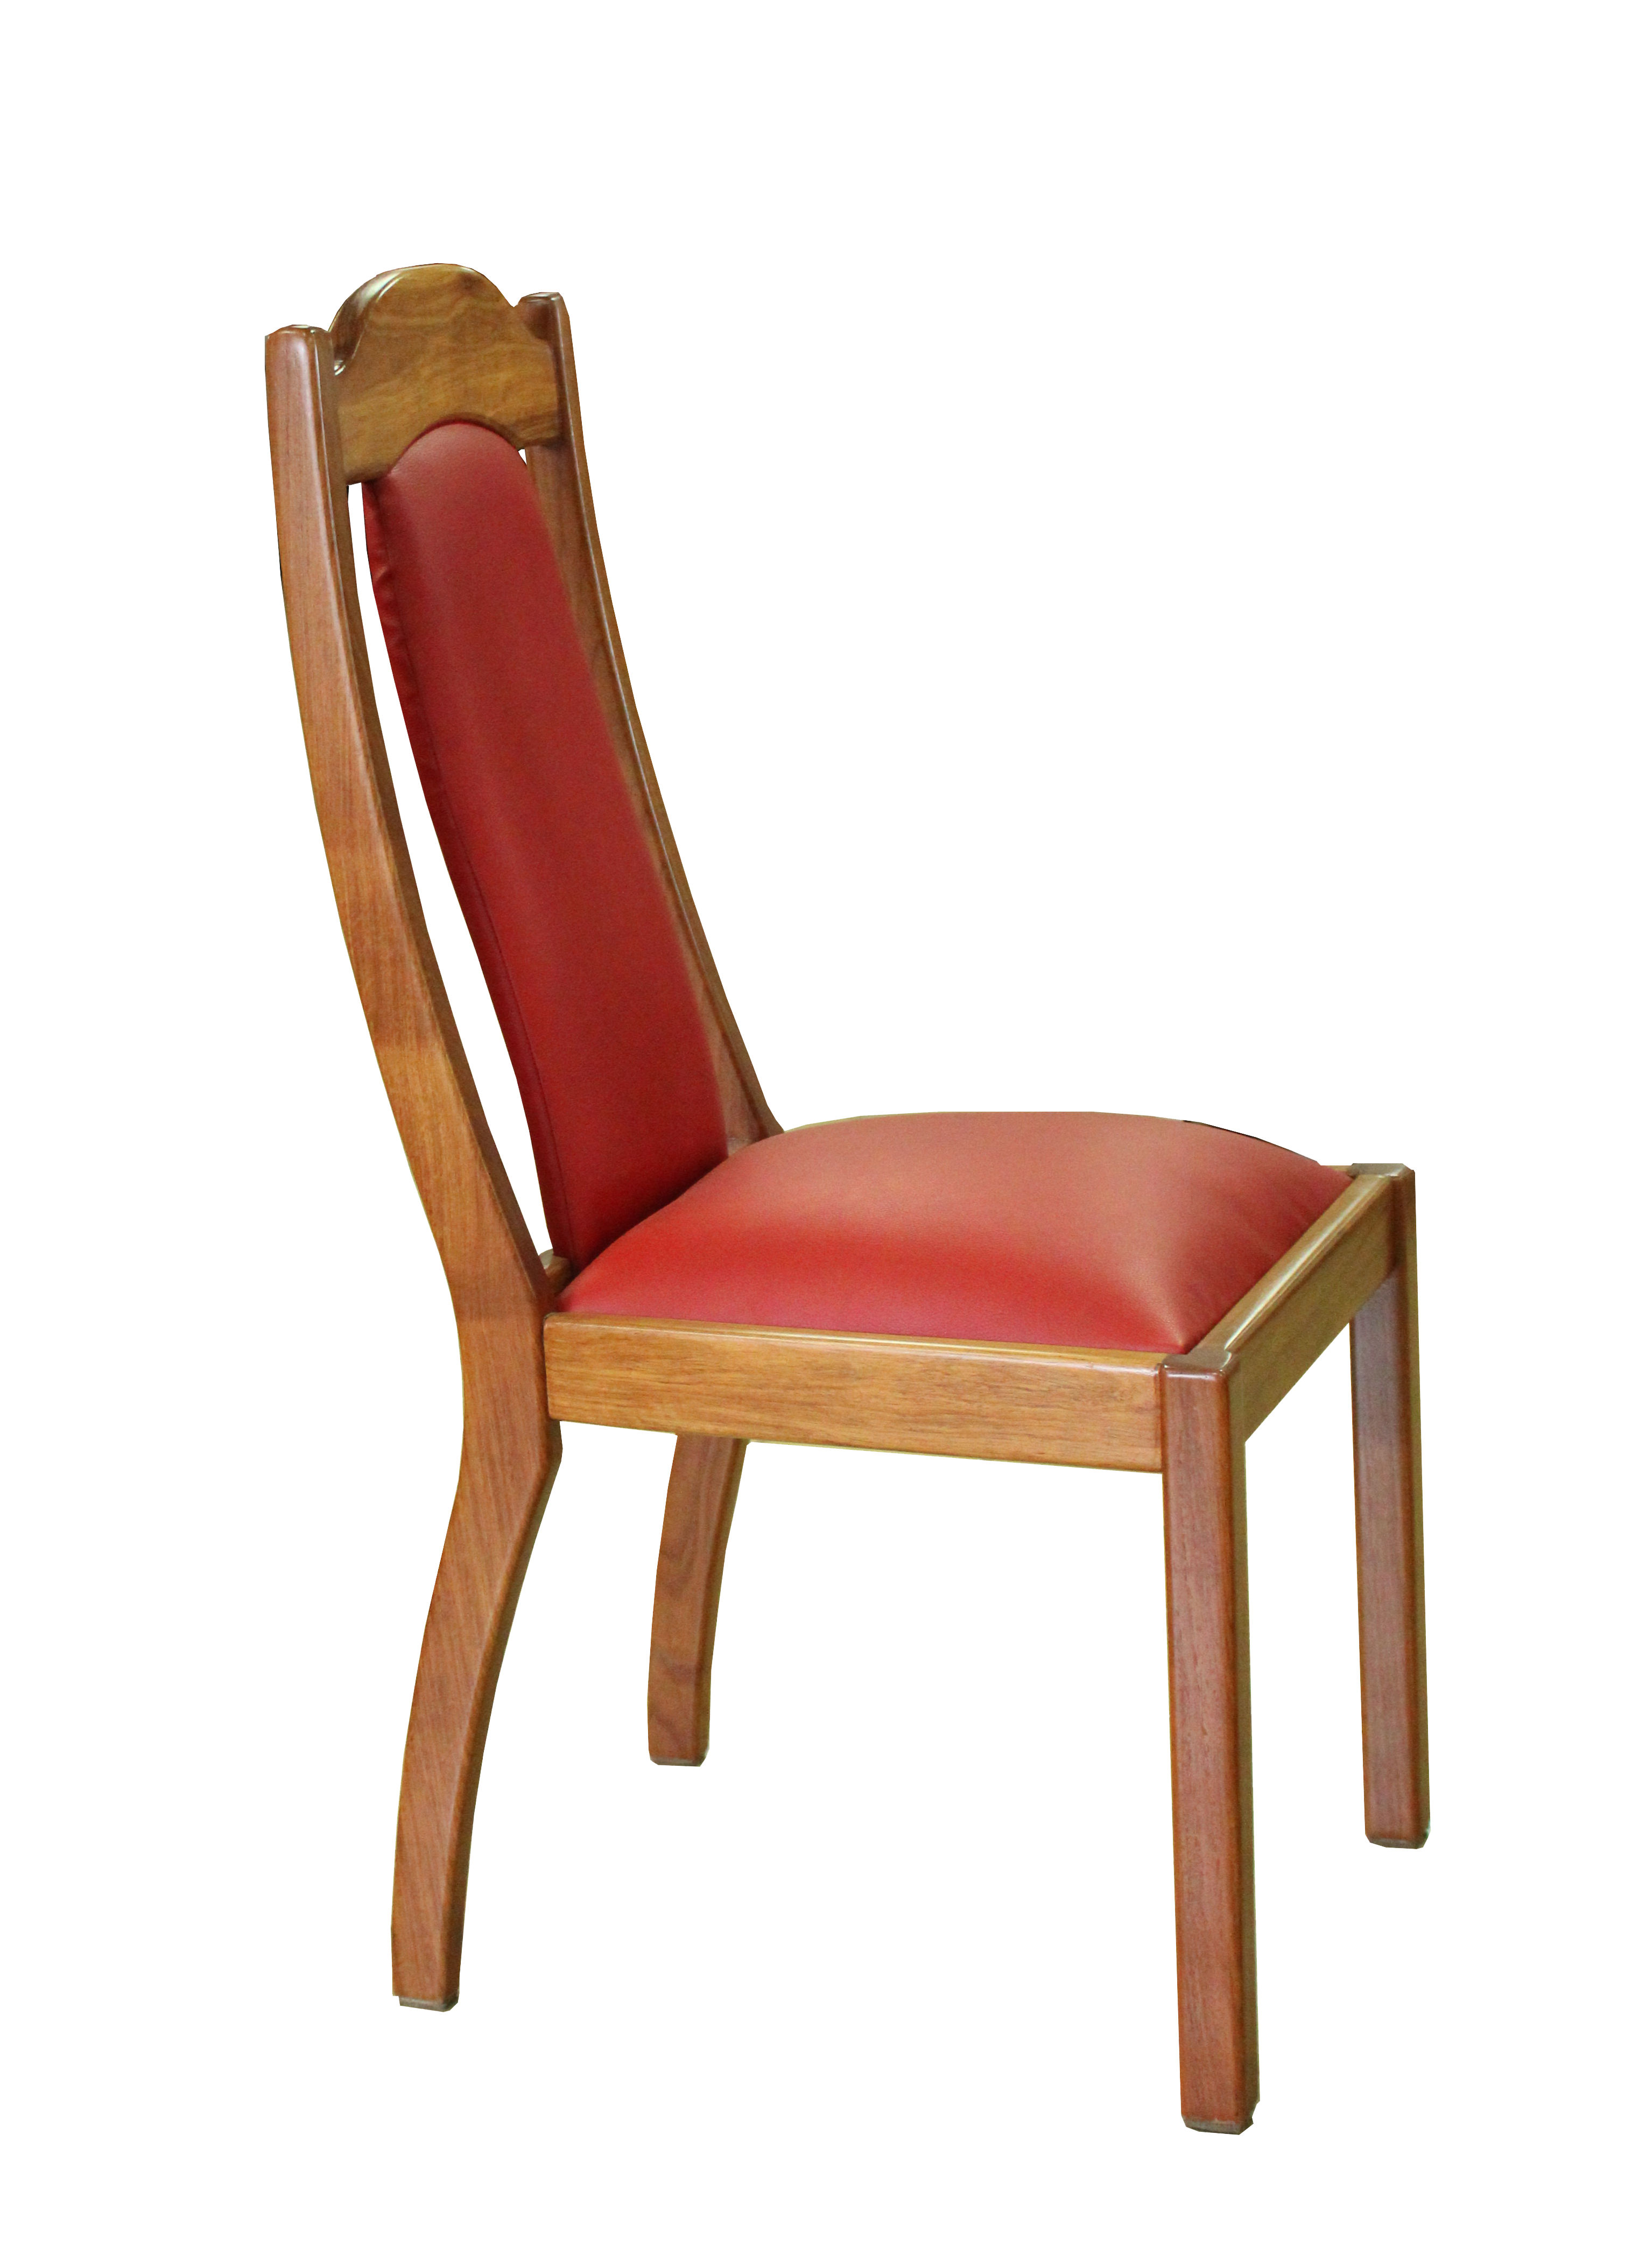 Chair with red cuisine